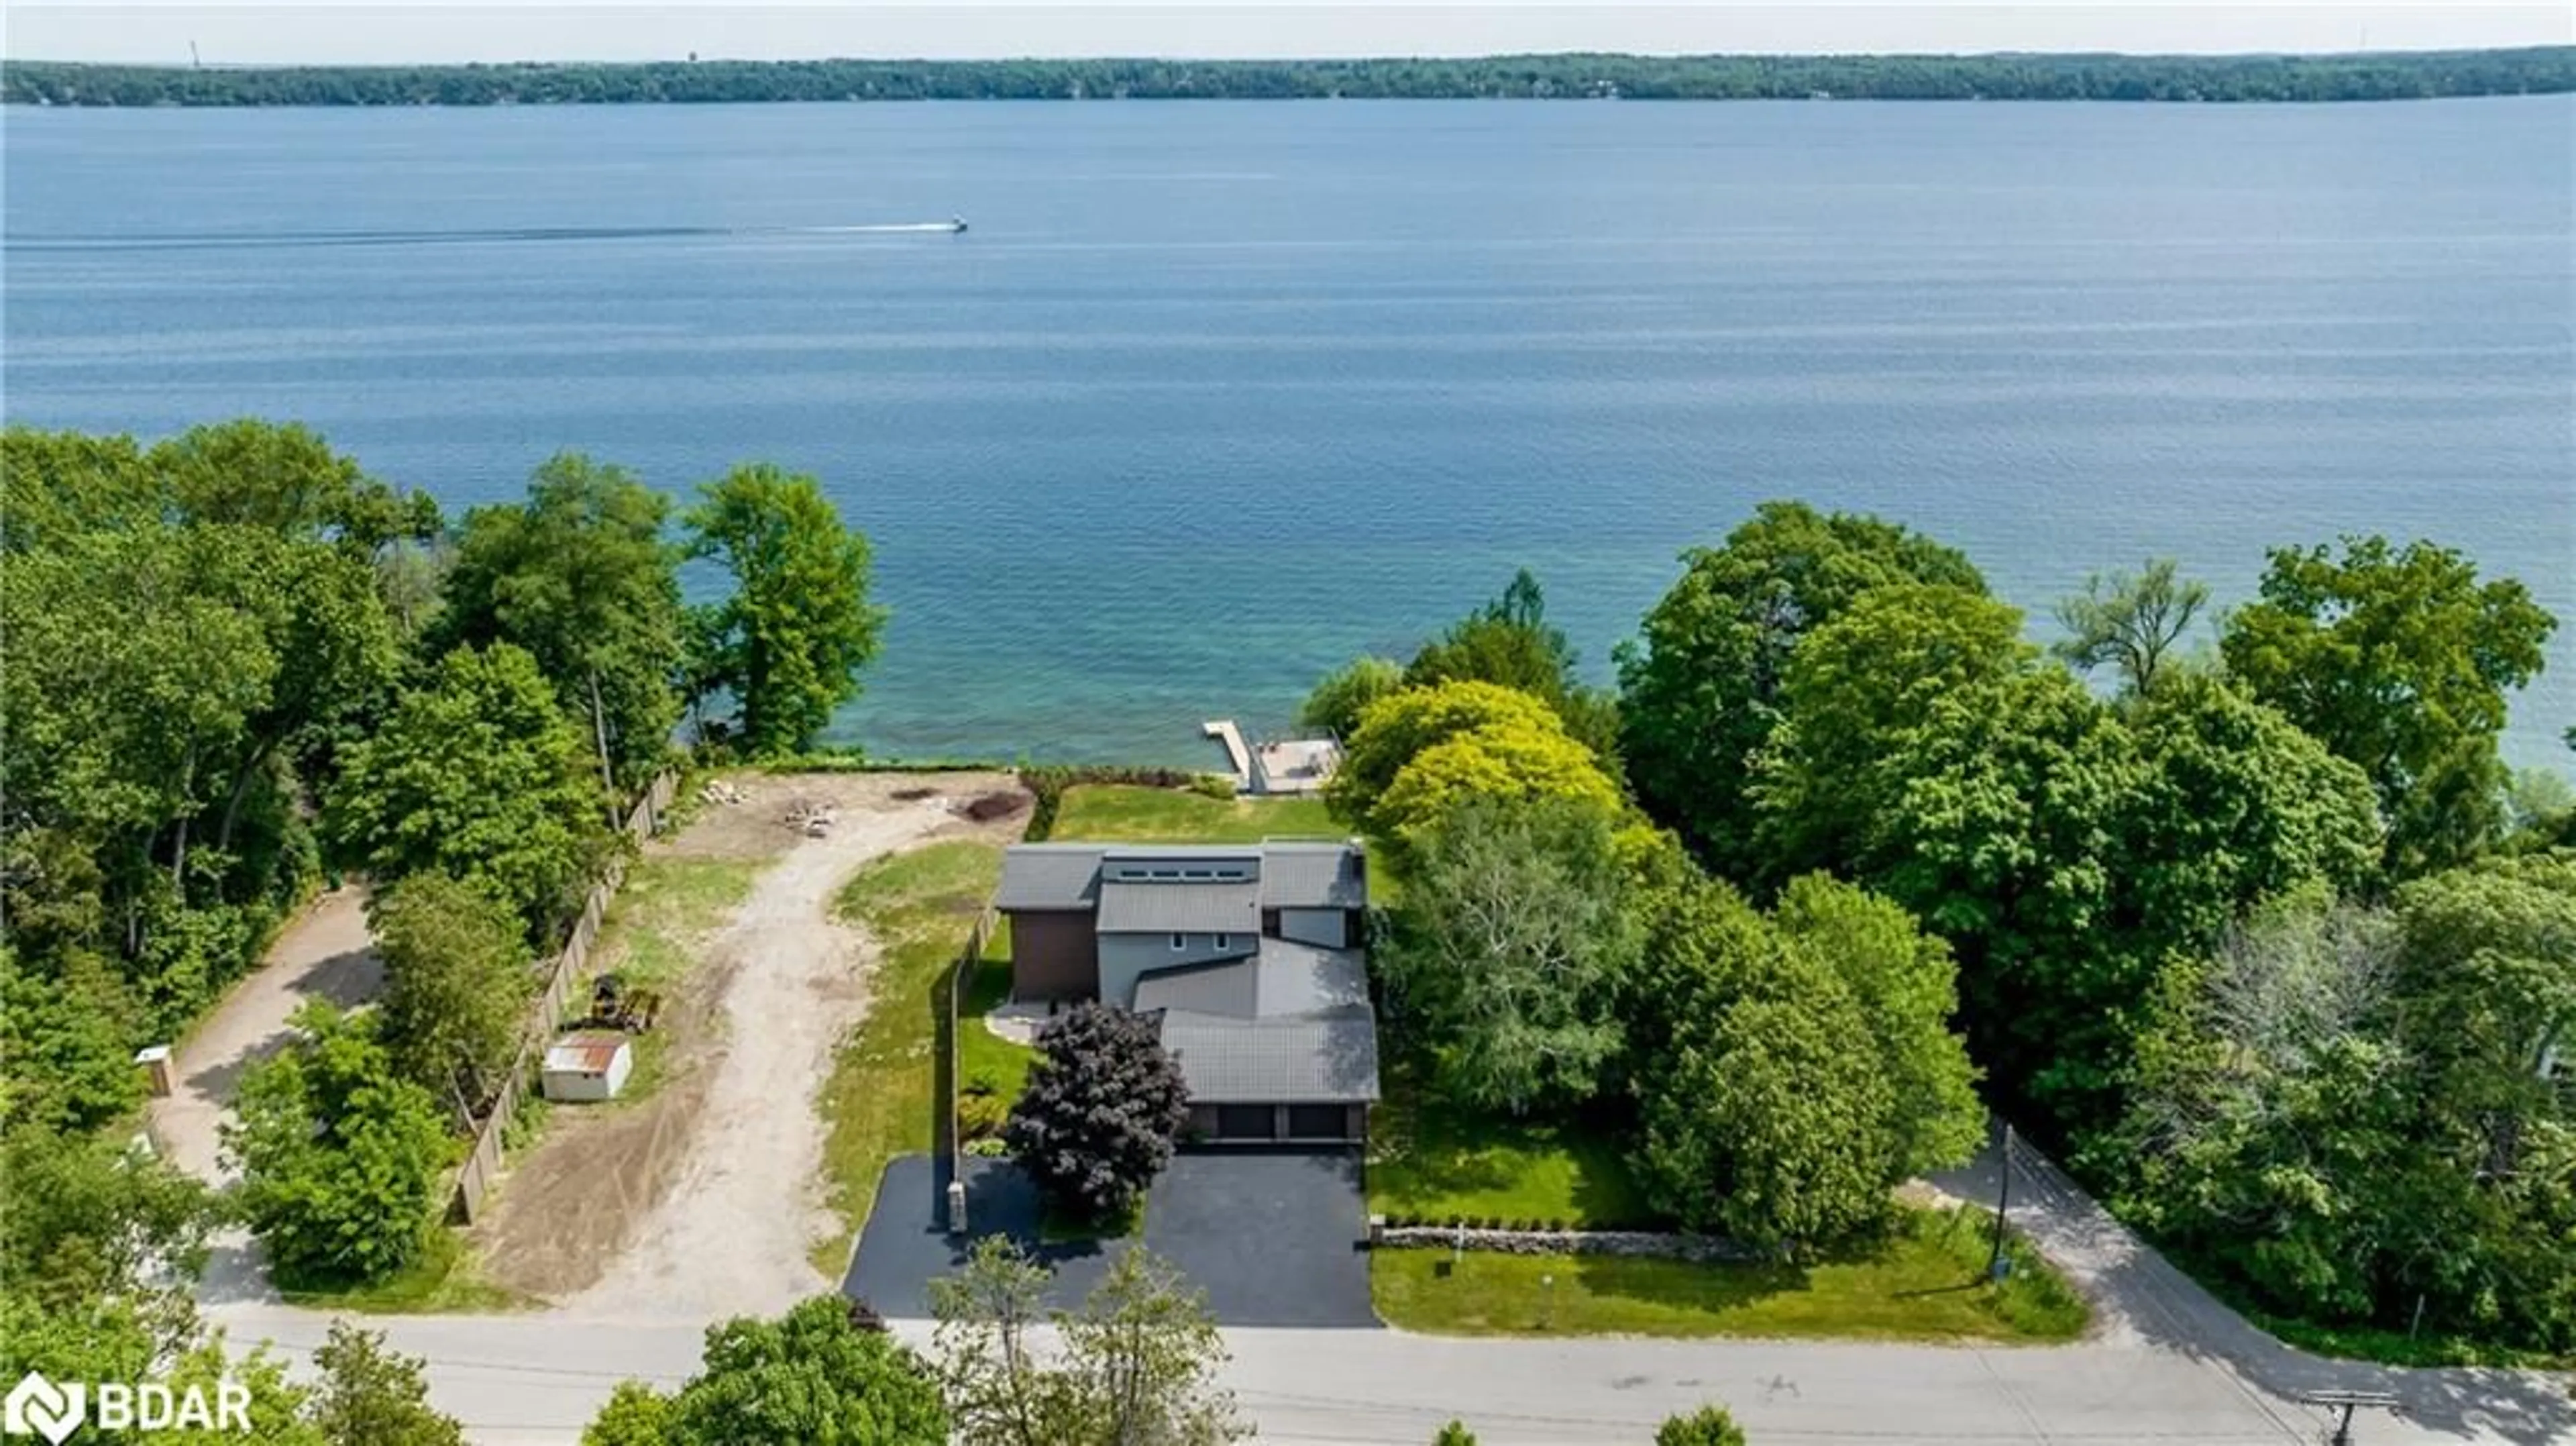 Lakeview for 27 & 31 Bay St, Oro-Medonte Ontario L0L 2L0